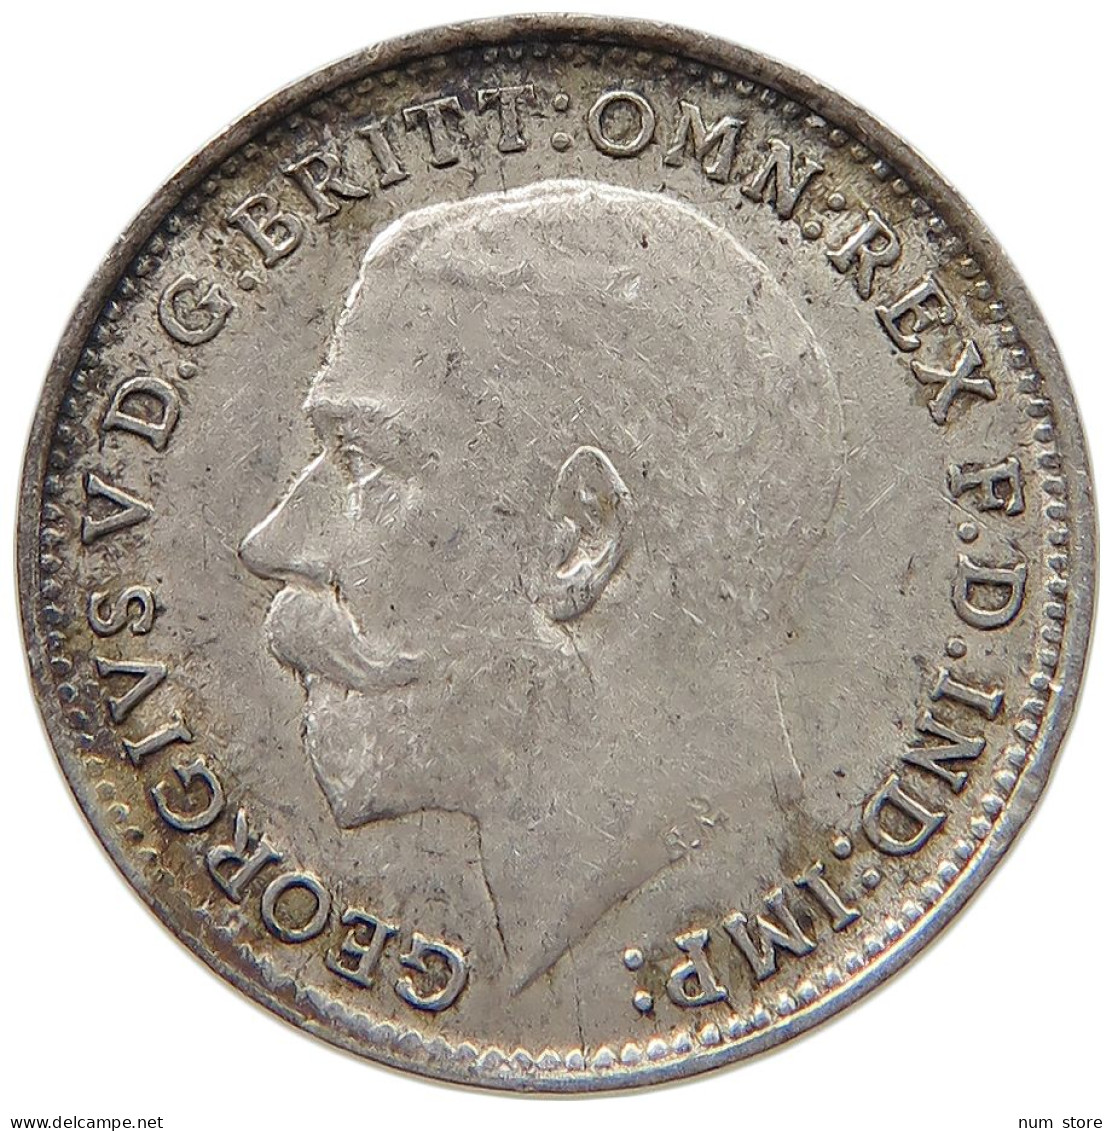 GREAT BRITAIN THREEPENCE 1914 George V. (1910-1936) #c036 0303 - F. 3 Pence